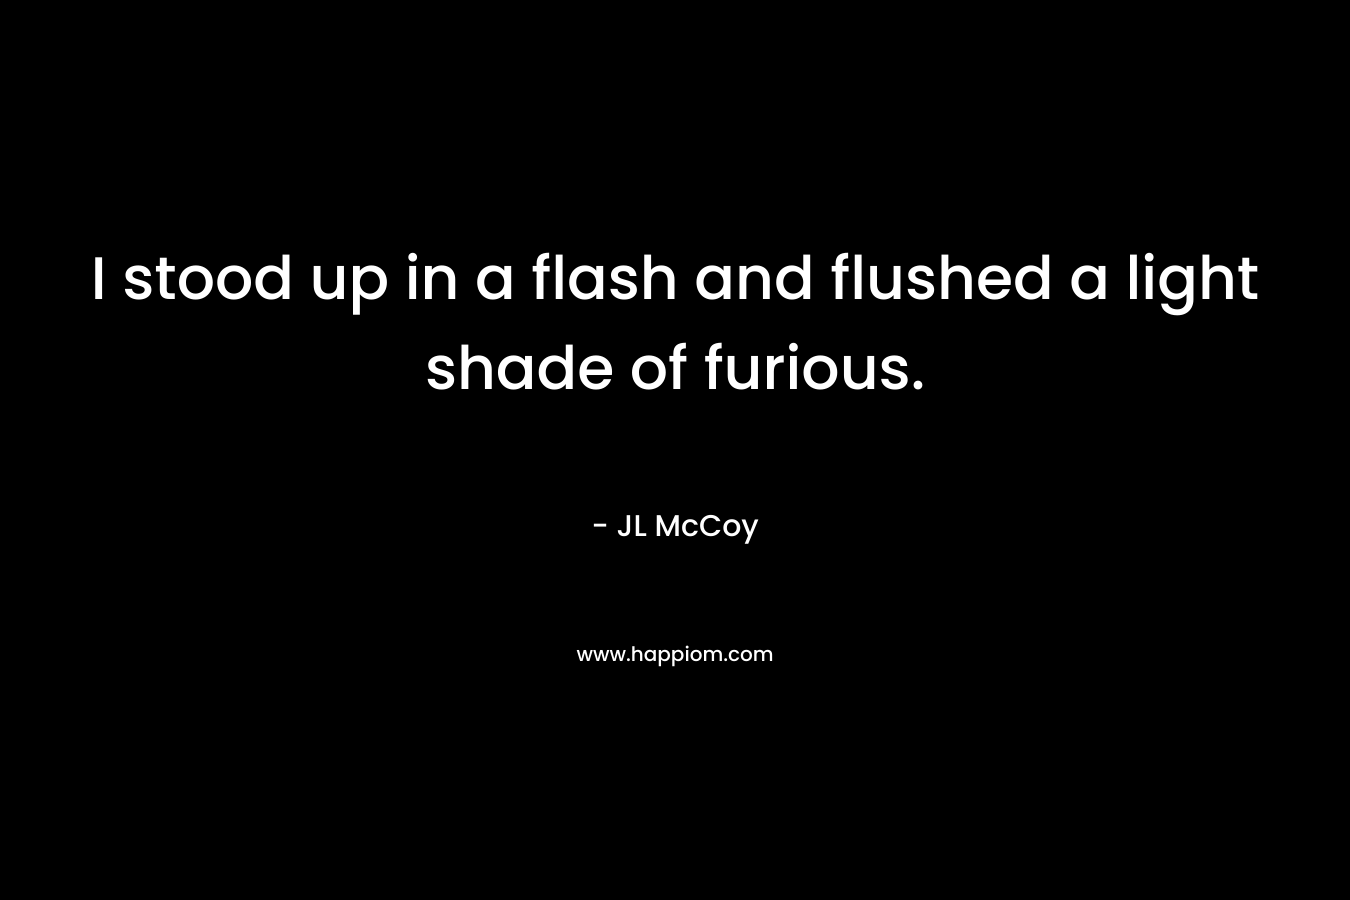 I stood up in a flash and flushed a light shade of furious. – JL McCoy